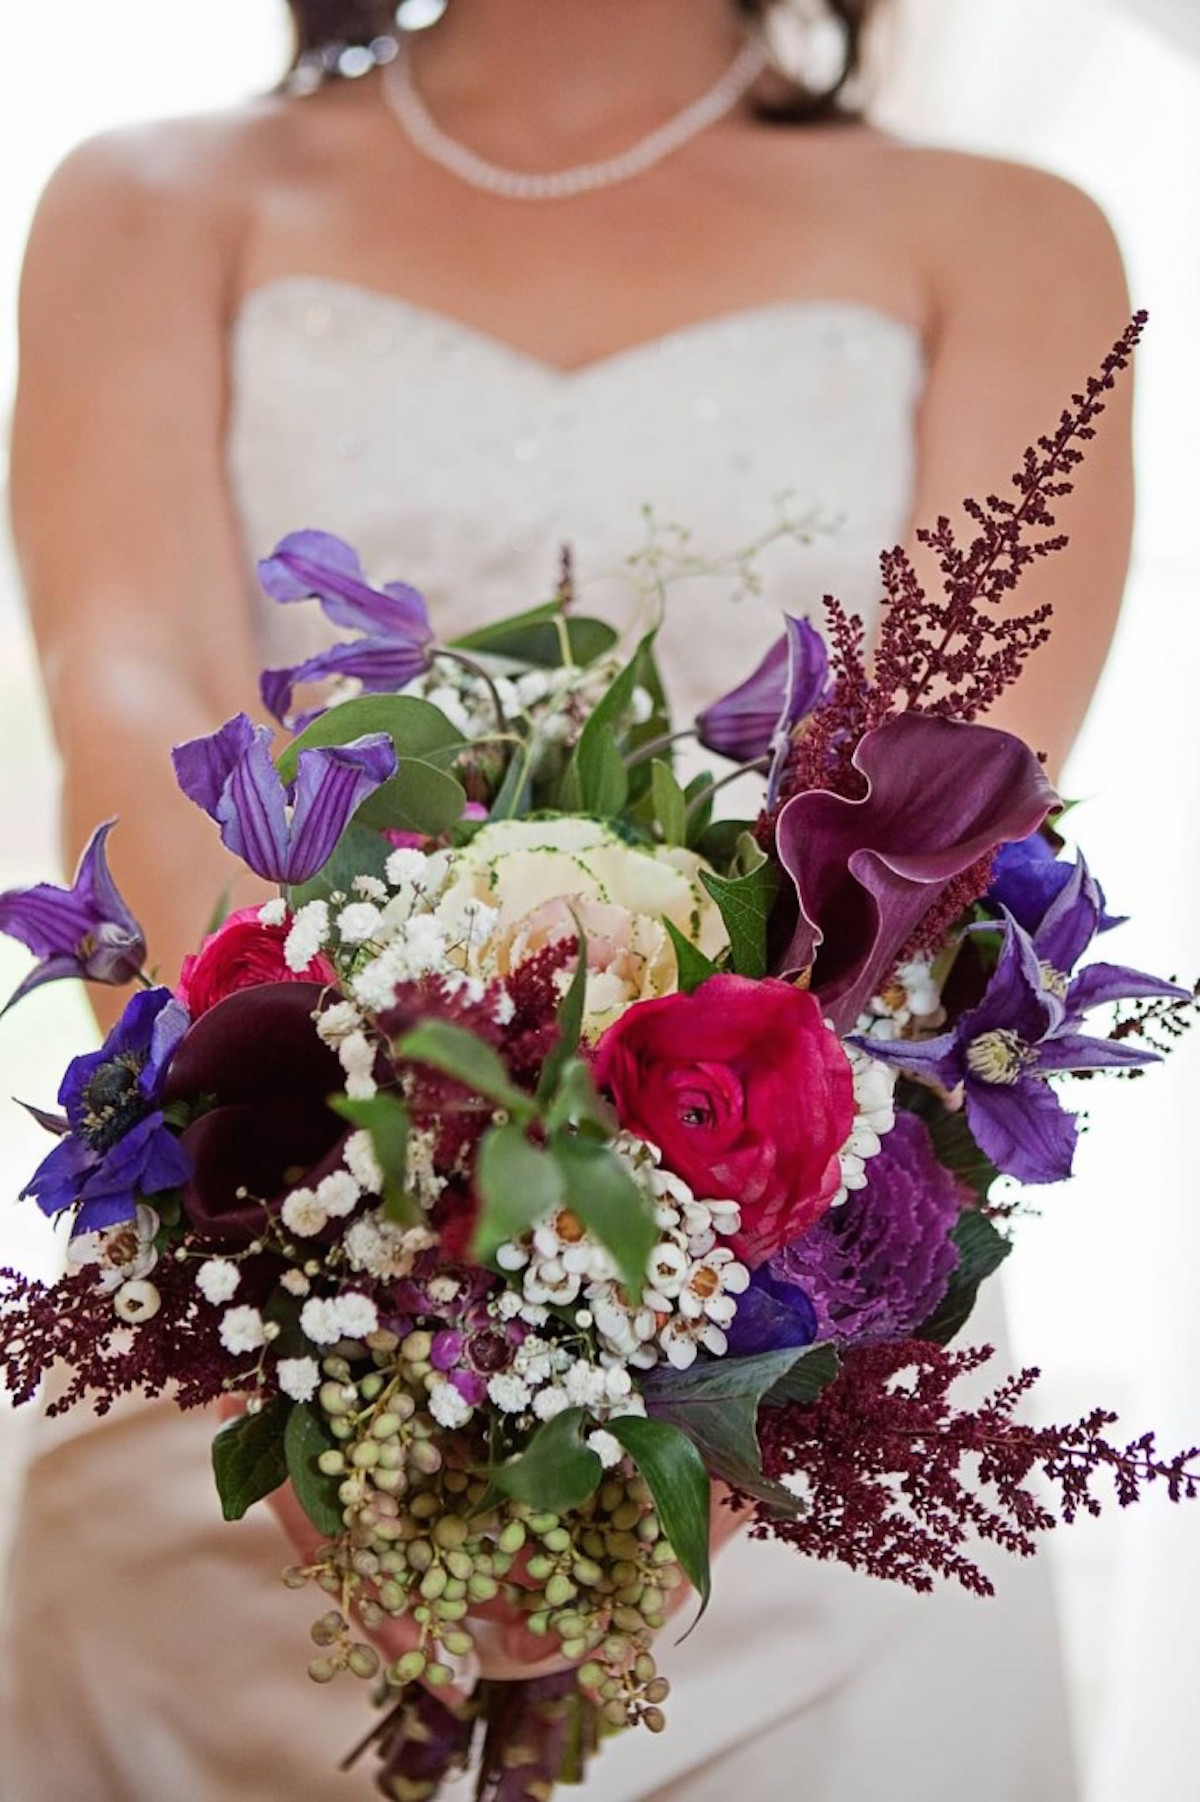 mini kale accented by ranunculus, waxflower, astilbe, calla lilies and purple clematis/Courtesy photo